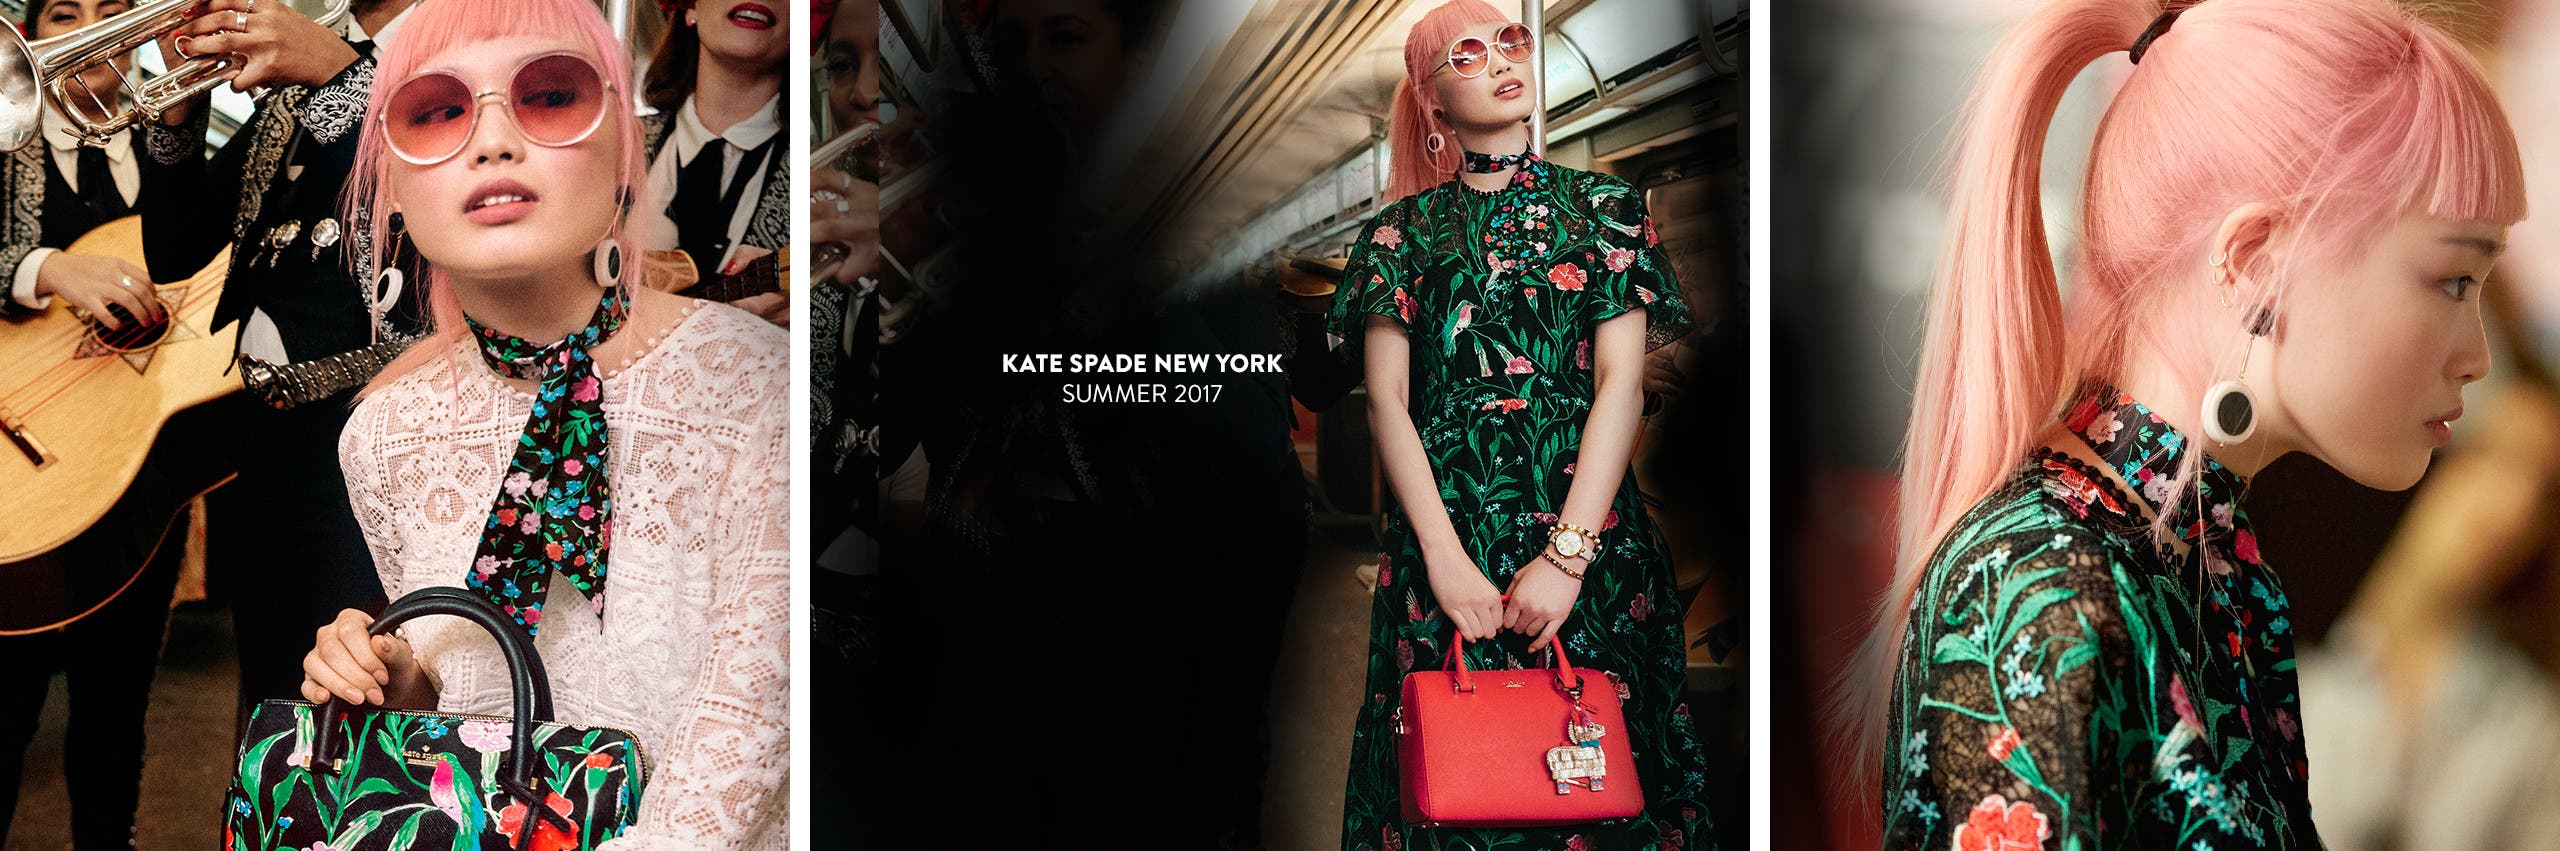 kate spade new york Accessories, Clothing & Shoes | Nordstrom